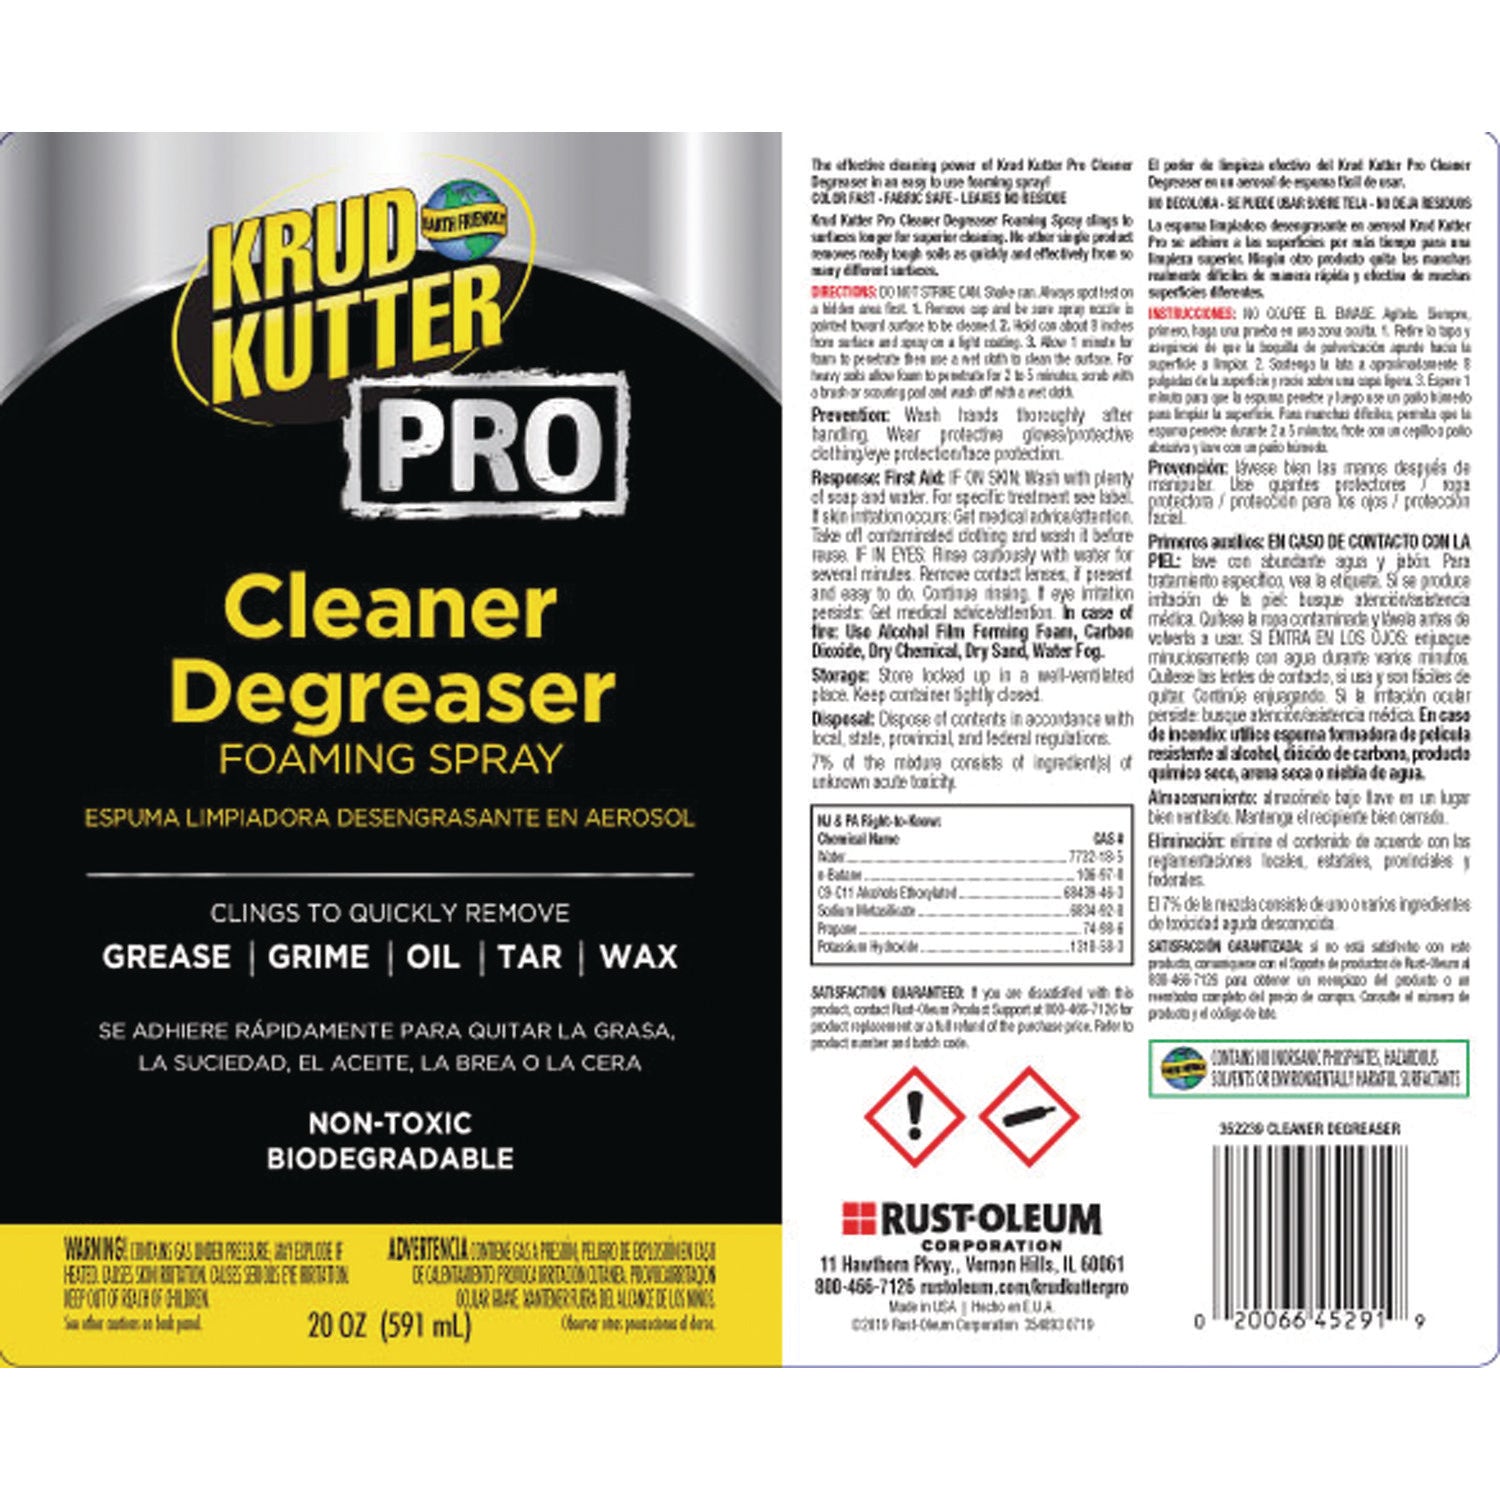 ready-to-use-cleaner-degreaser-foaming-spray-20-oz-aerosol-can-6-carton_rst352239 - 2